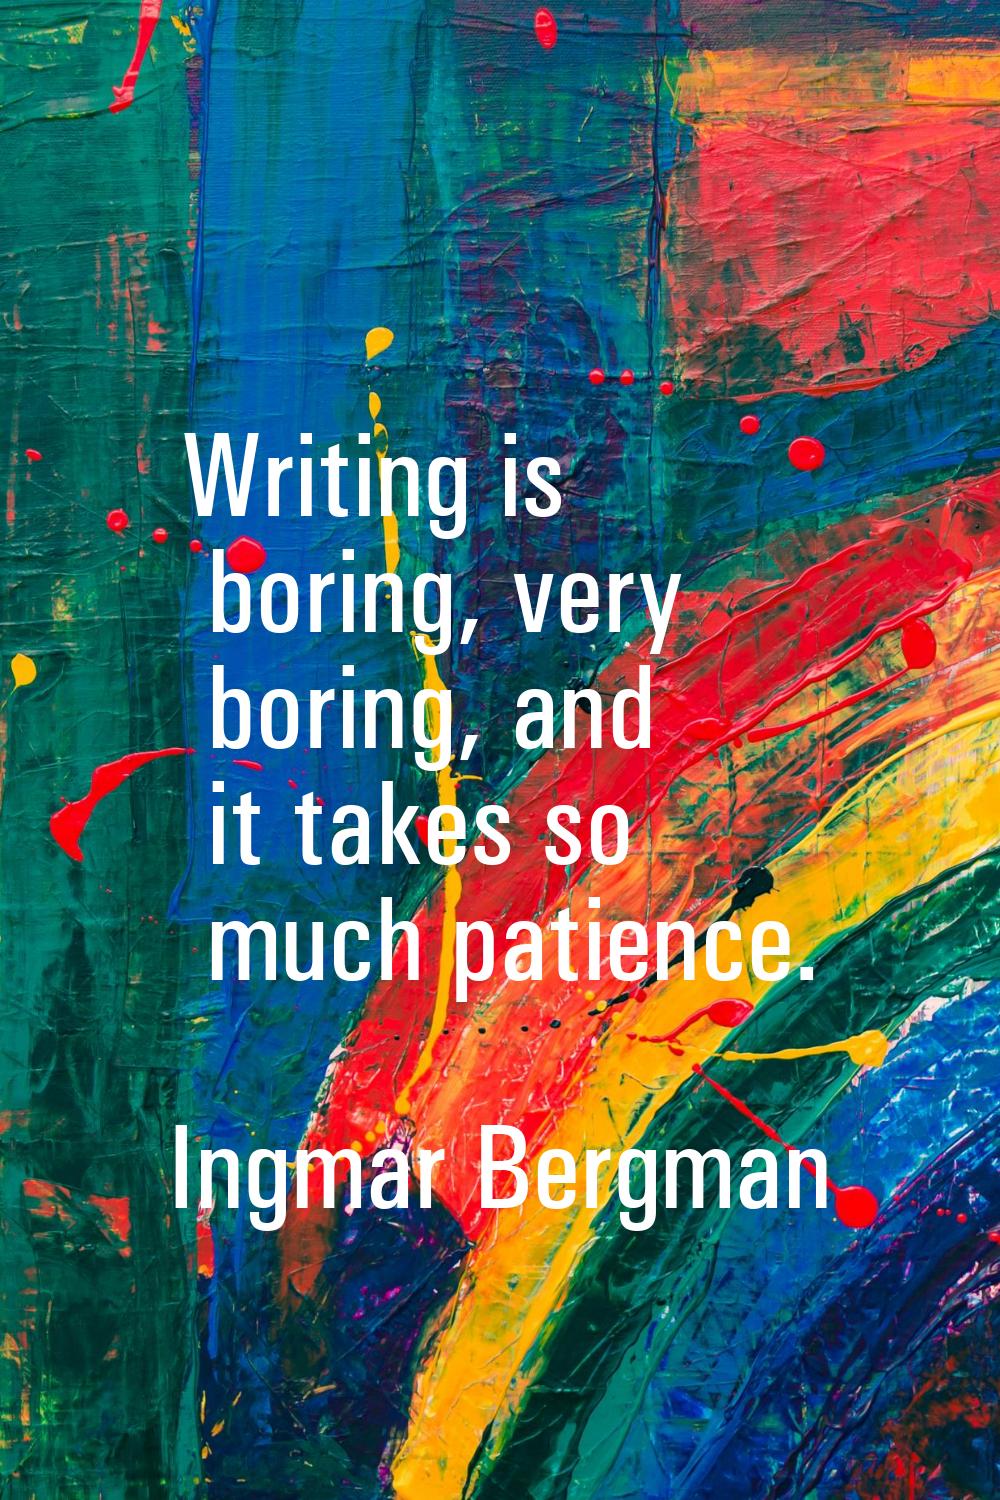 Writing is boring, very boring, and it takes so much patience.